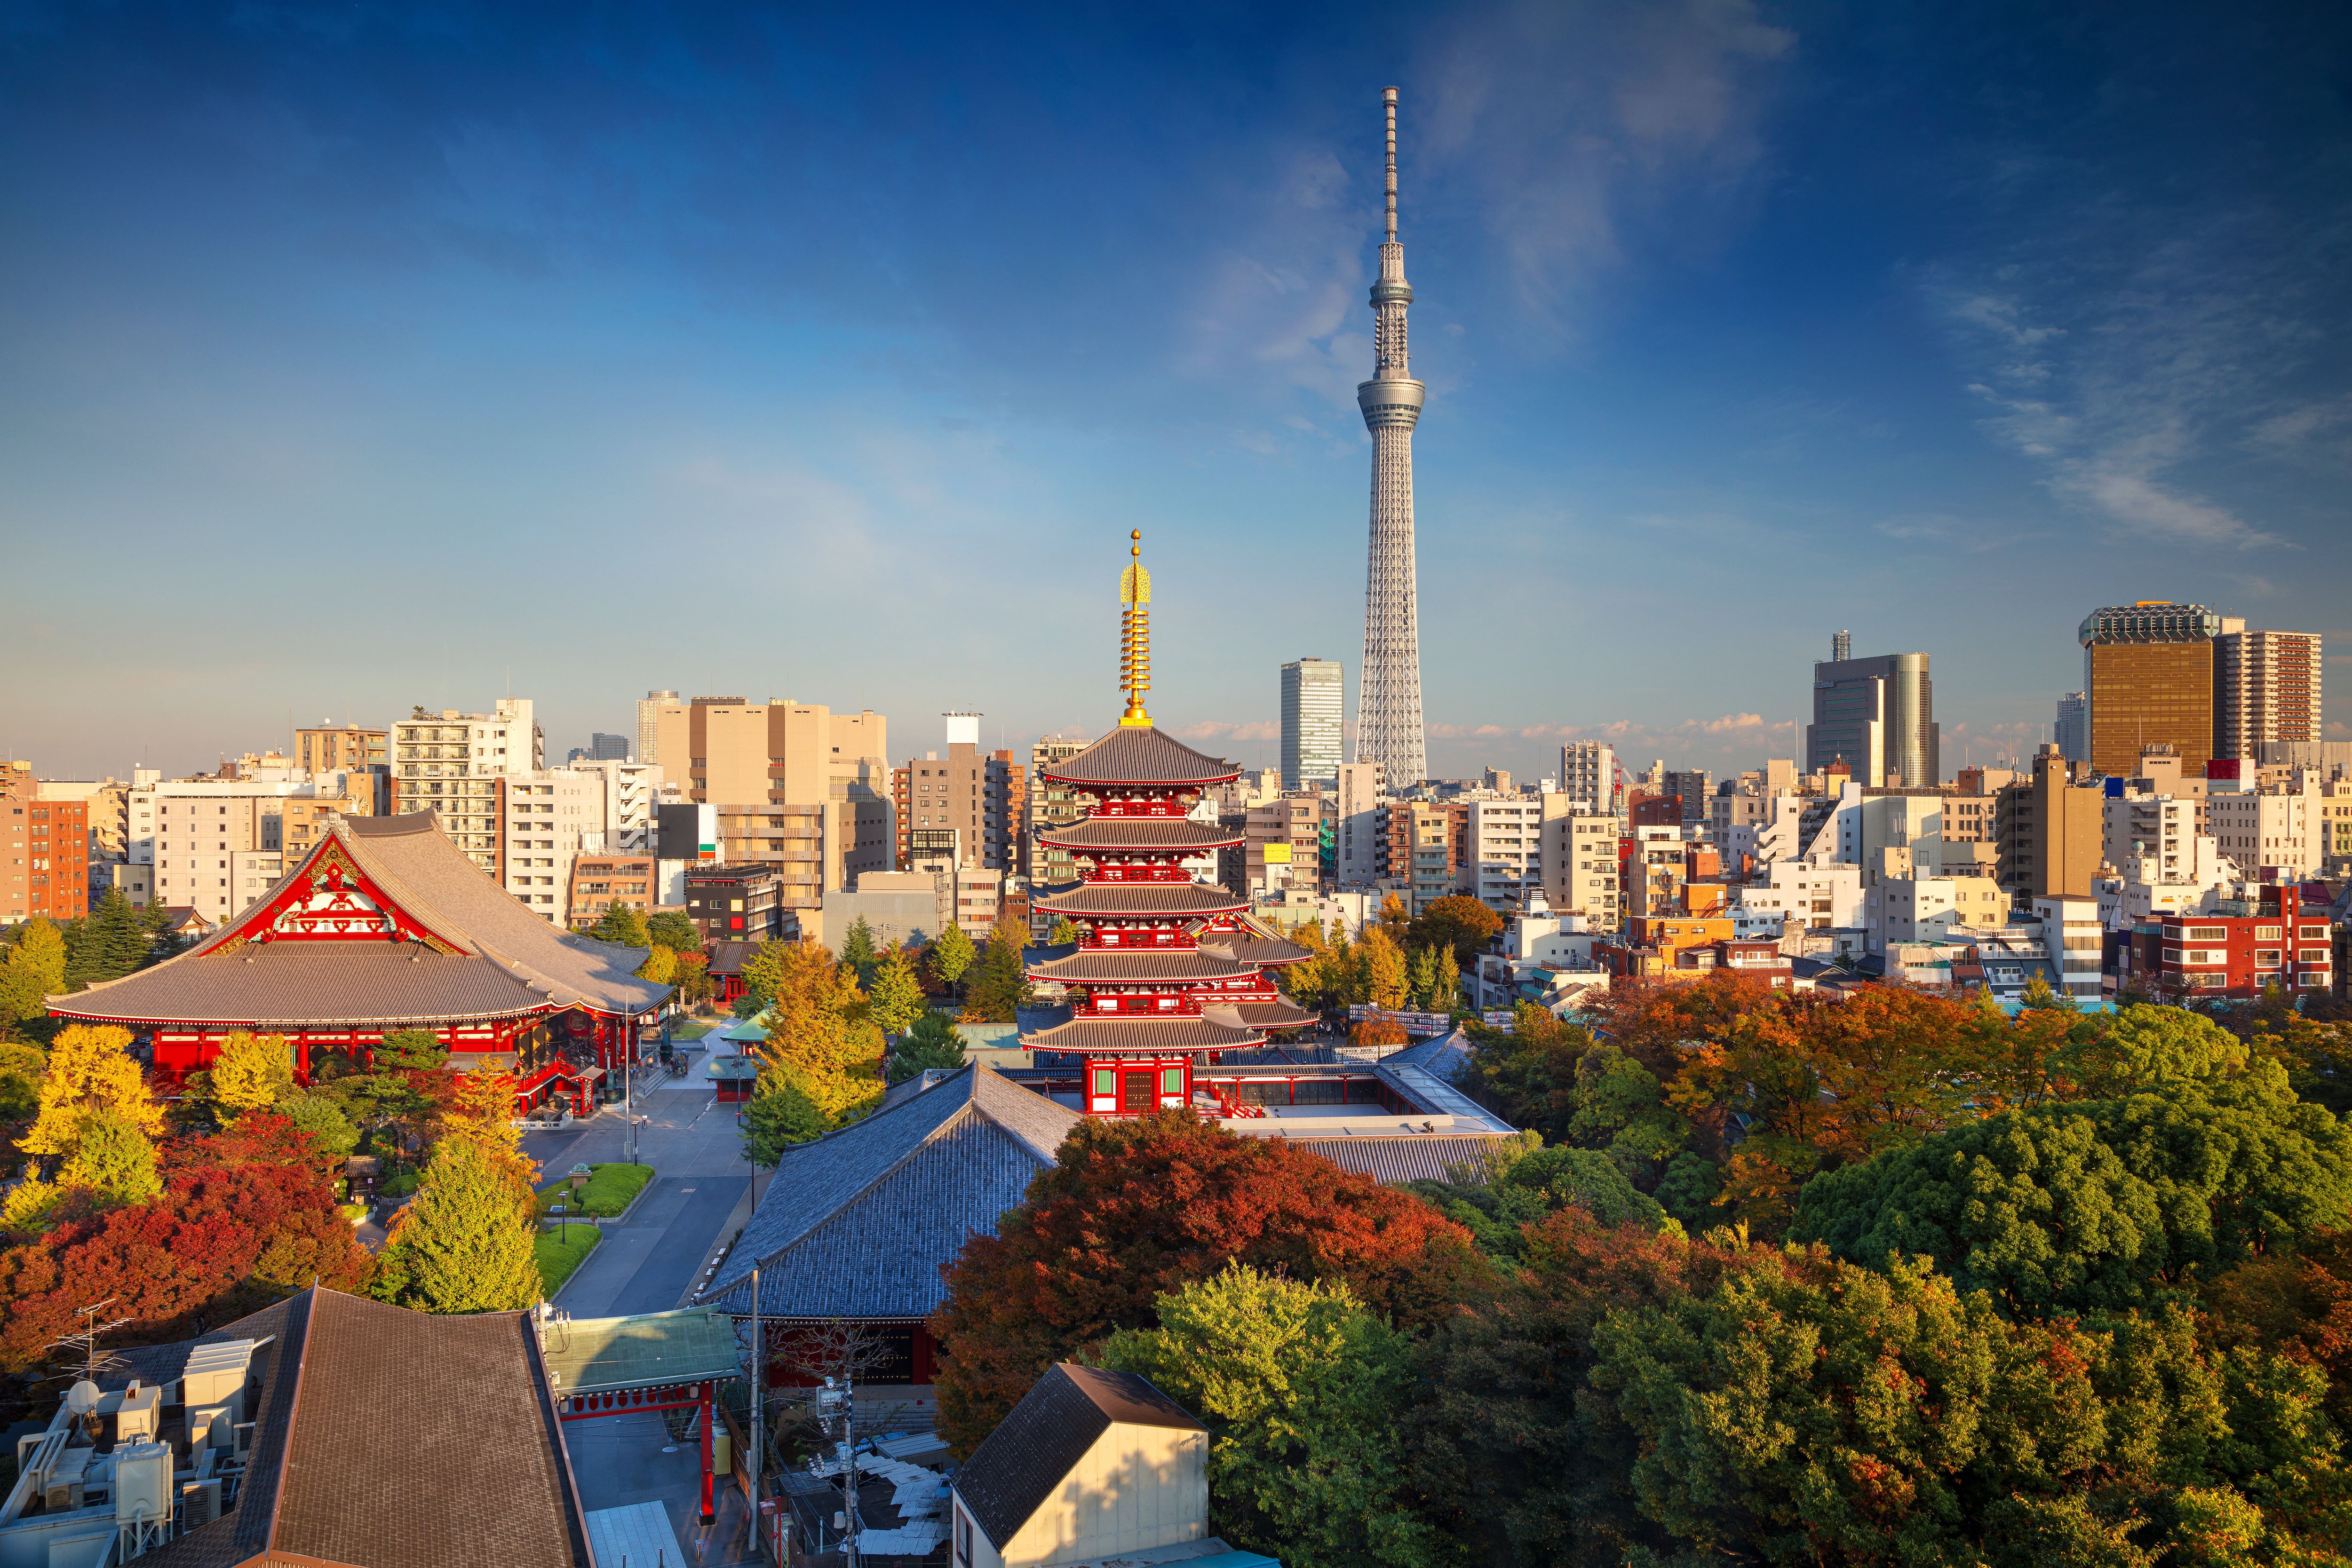 First-time in Tokyo: Top 10 things to see and do - NZ Herald